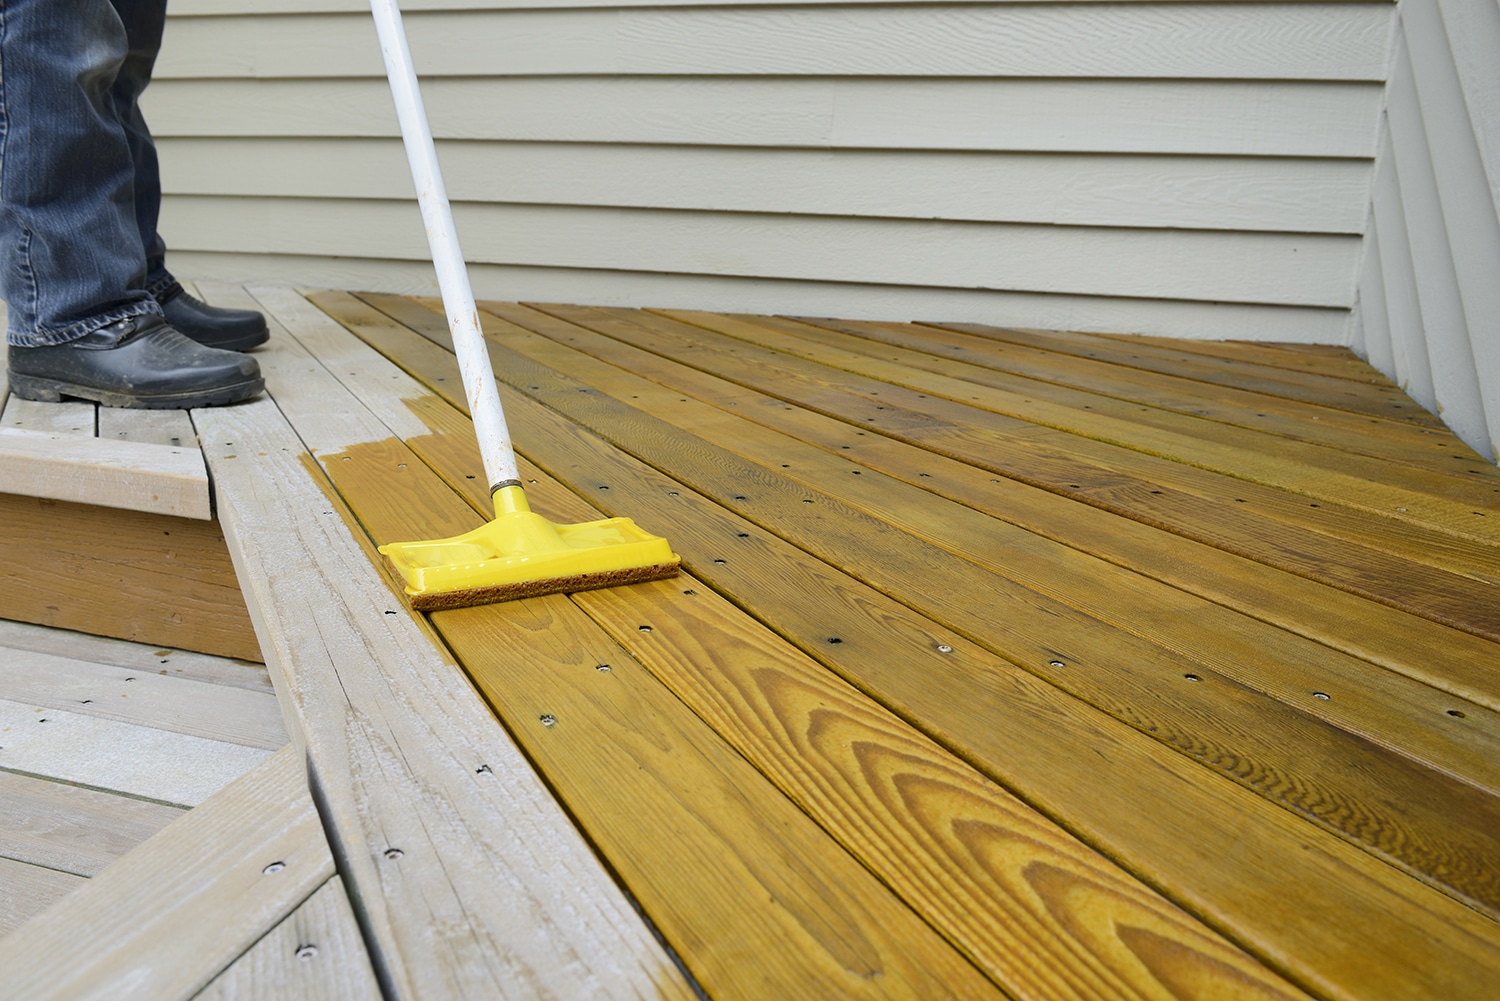 Painter using sponge applicator to apply stain to deck.